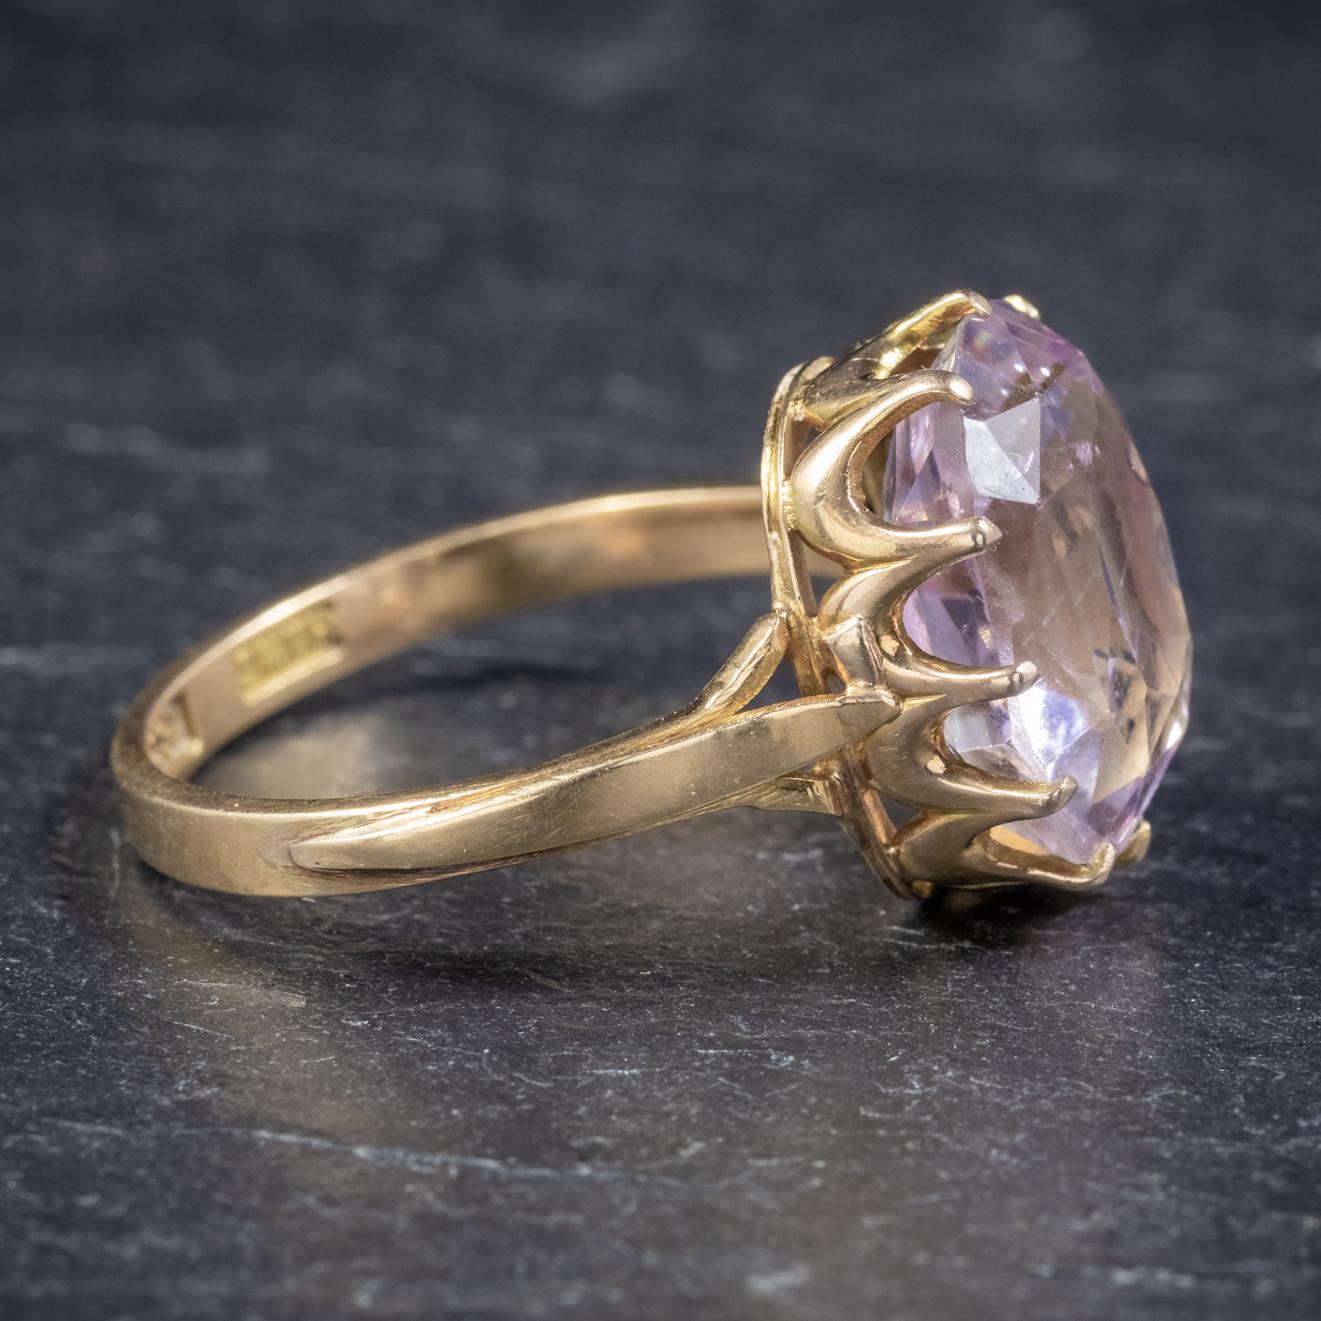 Antique Victorian Purple Spinel 18 Carat Gold 5 Carat Spinel, circa 1900 Ring For Sale 1